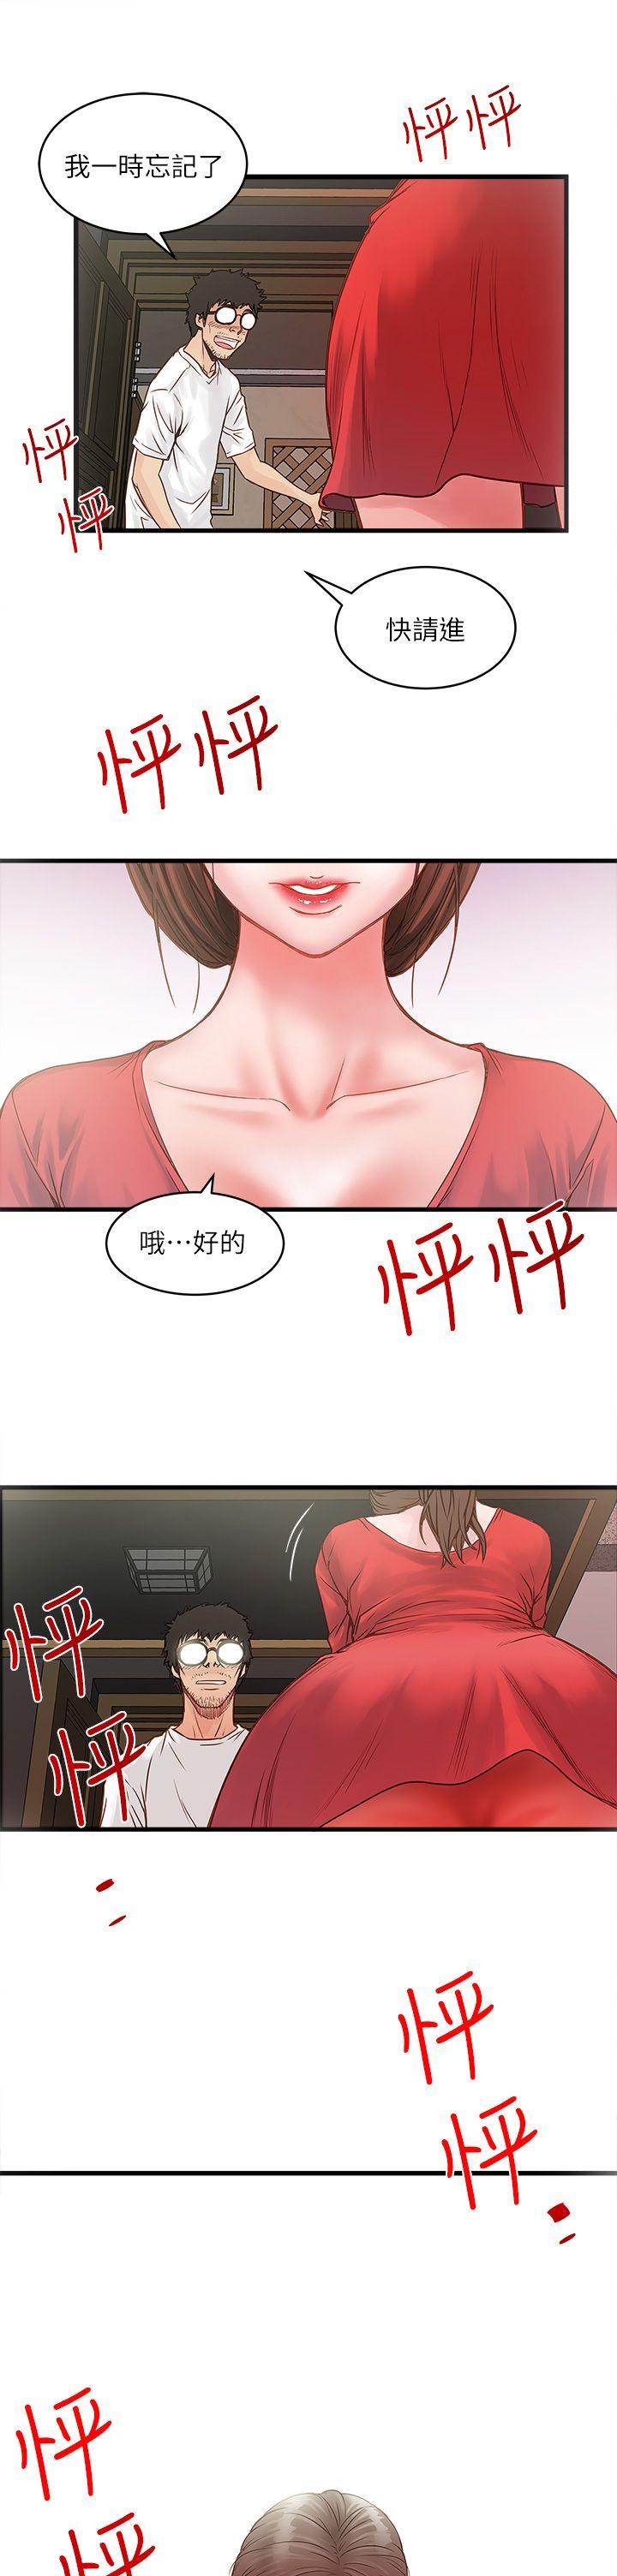 House Maid Raw - Chapter 1 Page 63